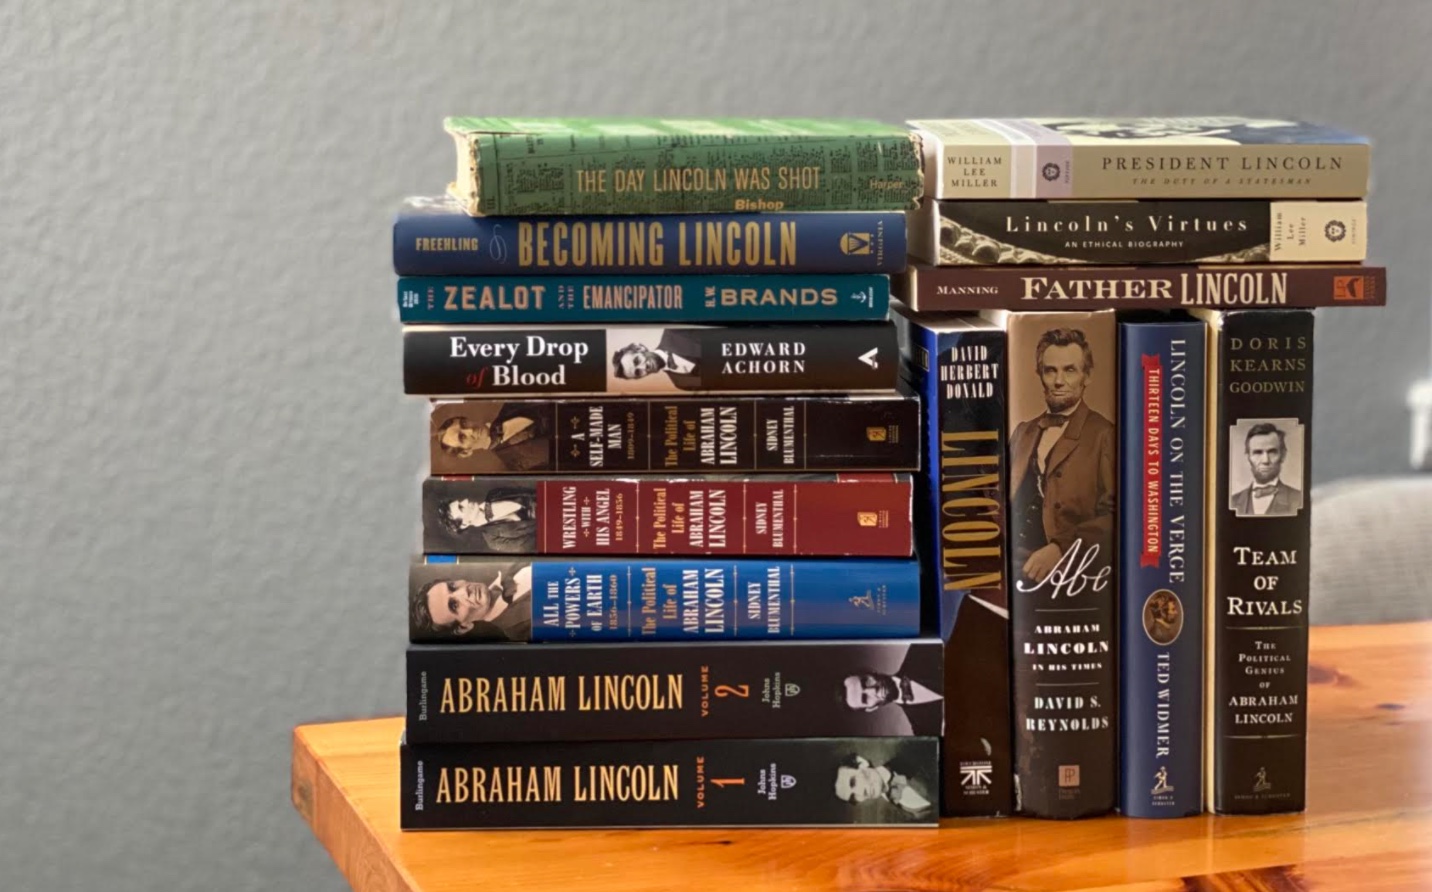 A stack of biography books on a wooden table.